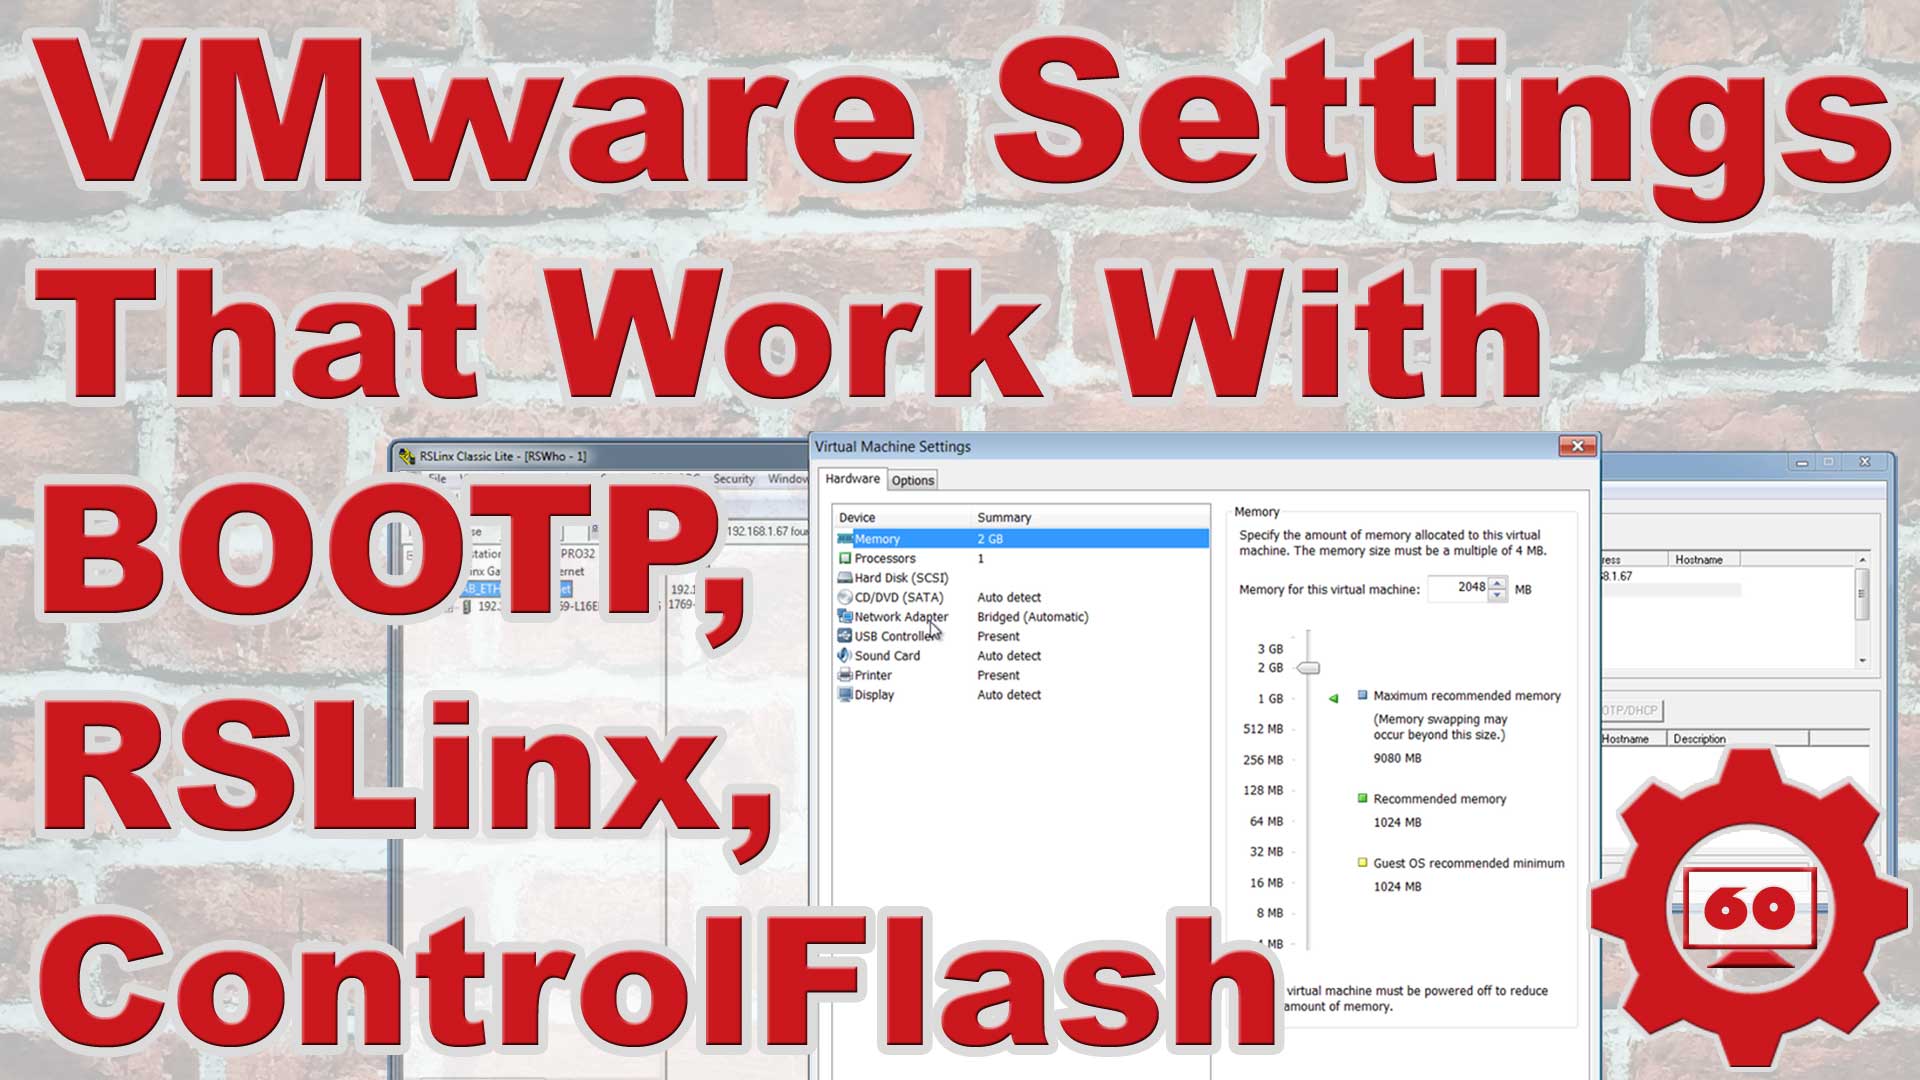 VMware - Settings that work with RSLinx, ControlFlash, BOOTP (M2E18)